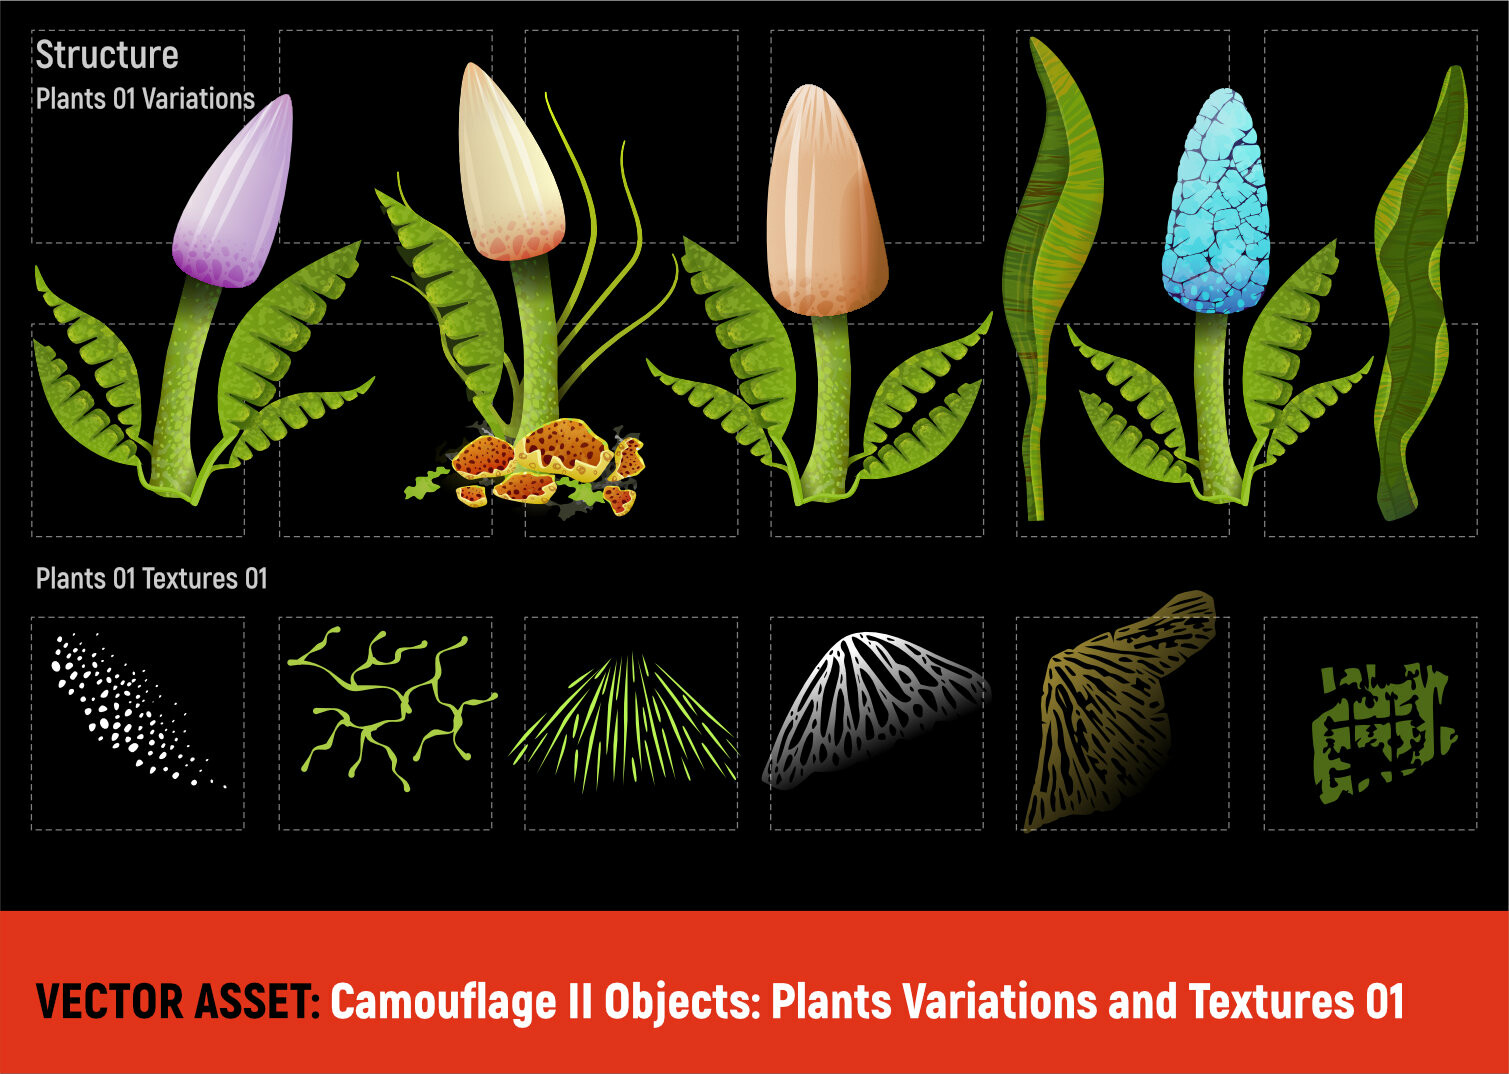 Vector Assets: Camouflage 2
Plants, Variations and Textures 01